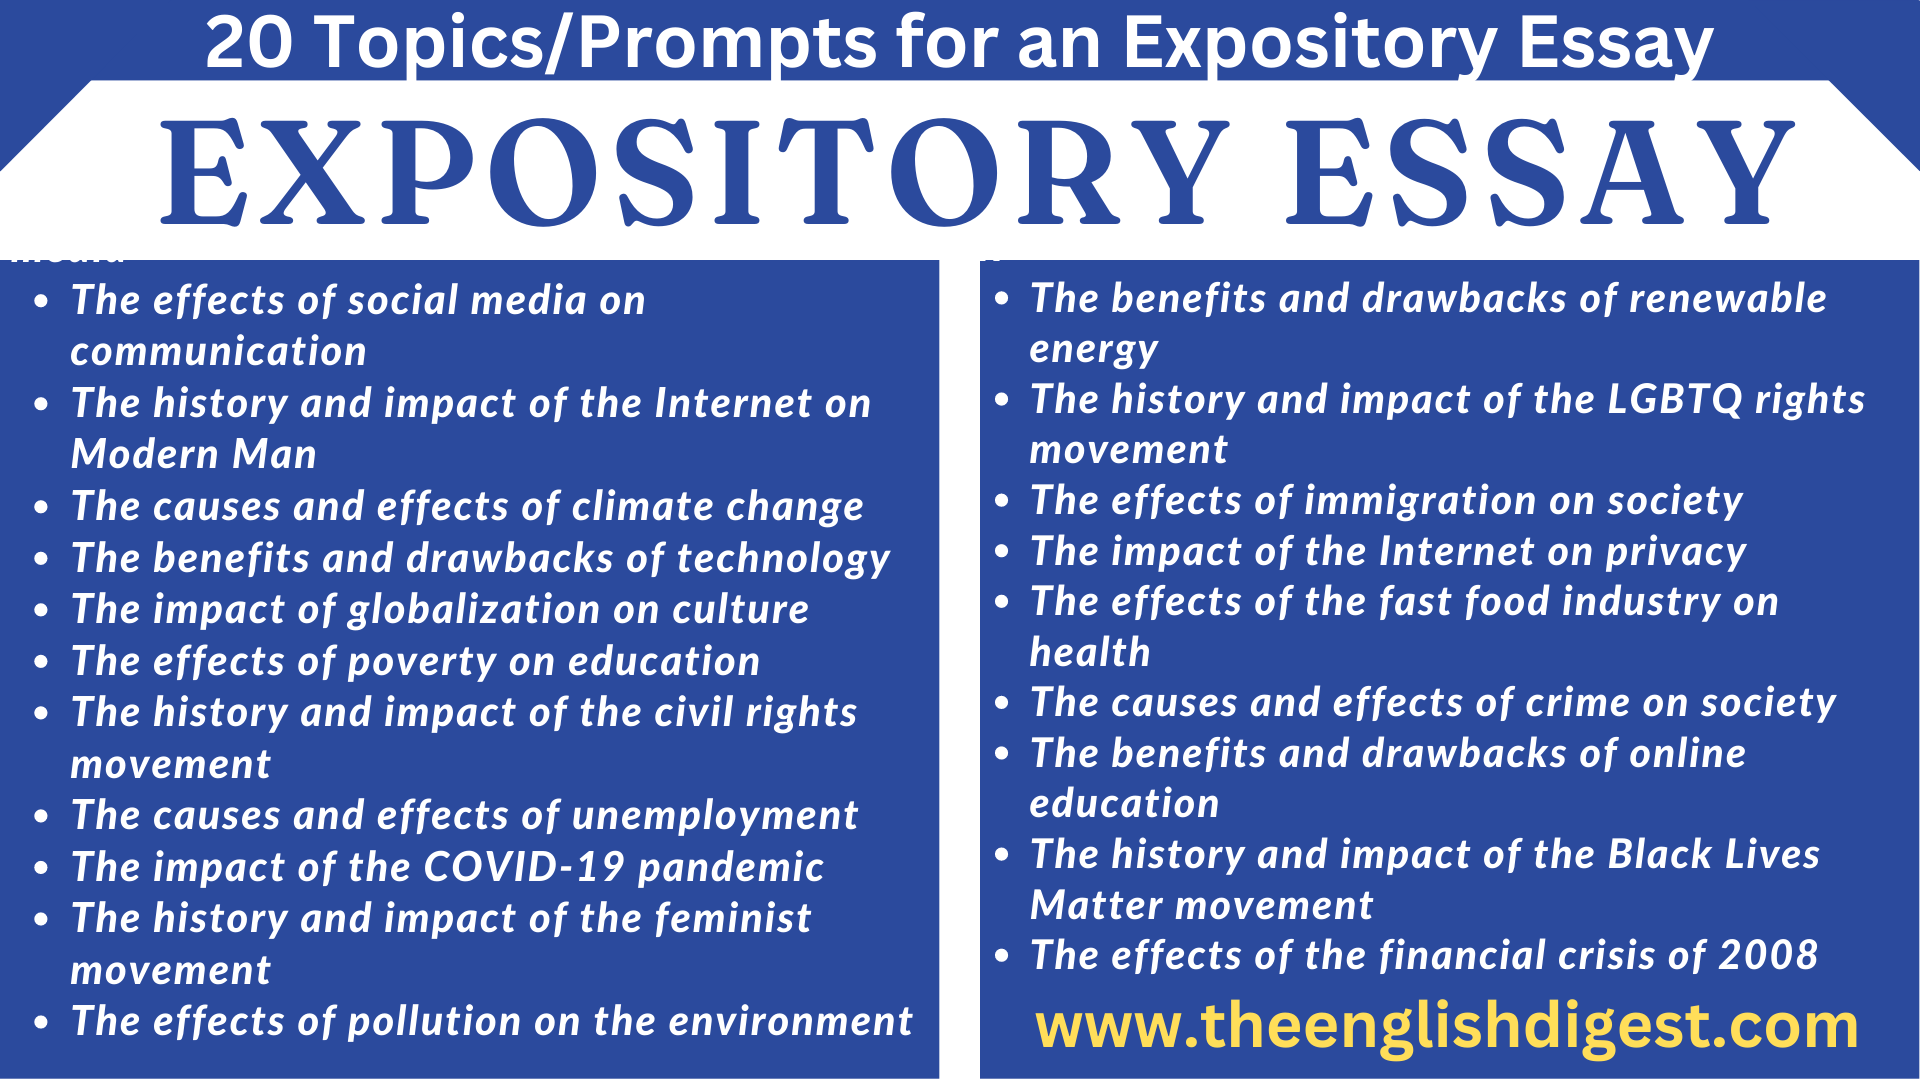 an expository essay can be organized around which themes